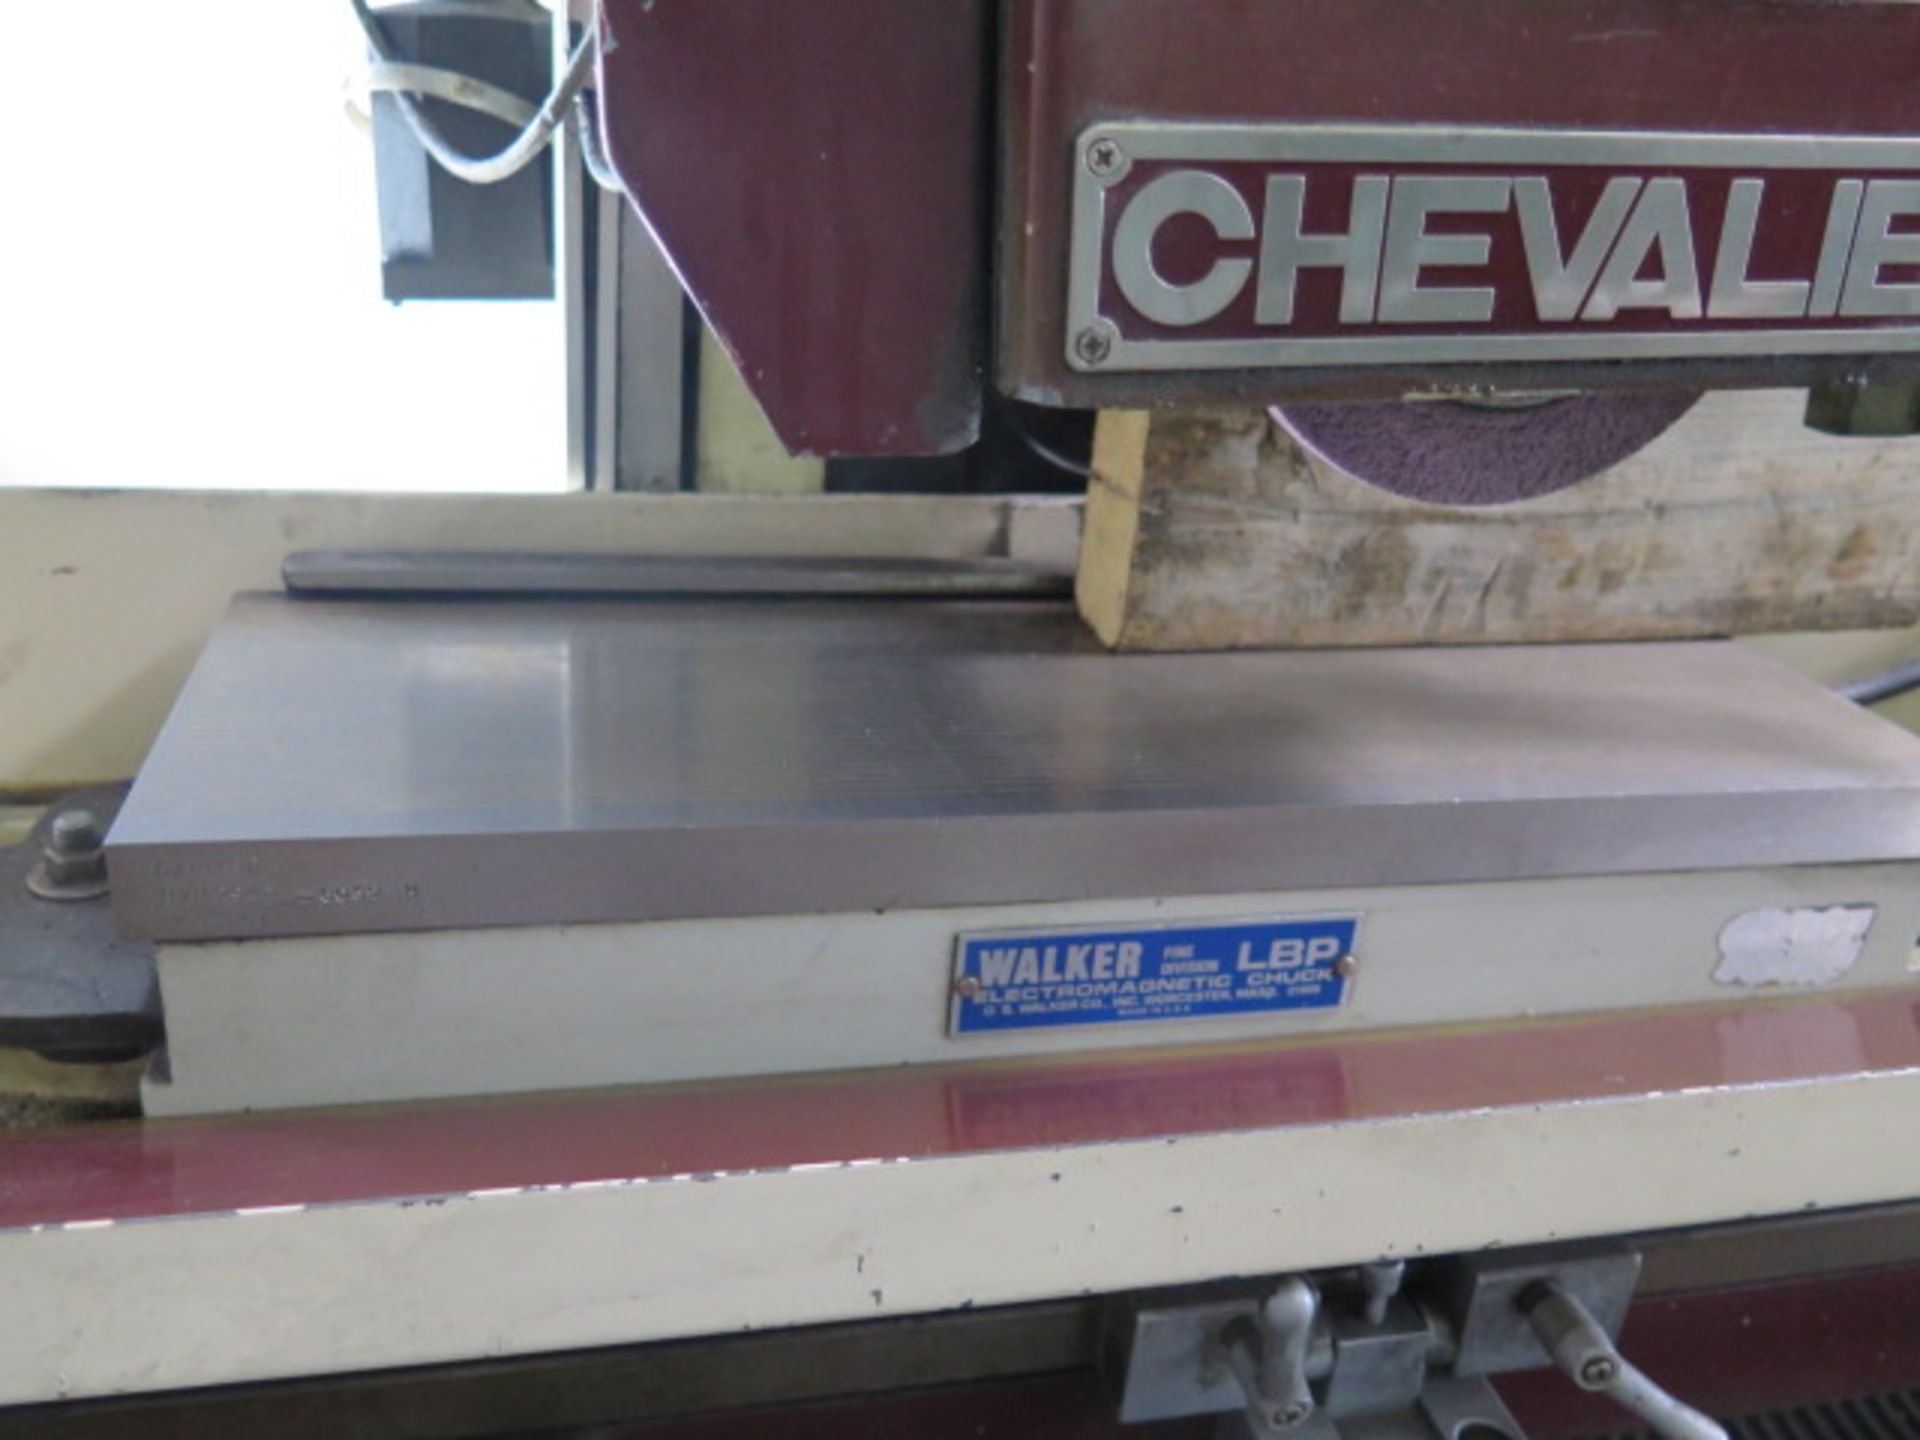 Falcon Chevalier FSG-618M 6” x 18” Surface Grinder s/n A3833047 w/ Acu-Rite Prog DRO, SOLD AS IS - Image 6 of 13